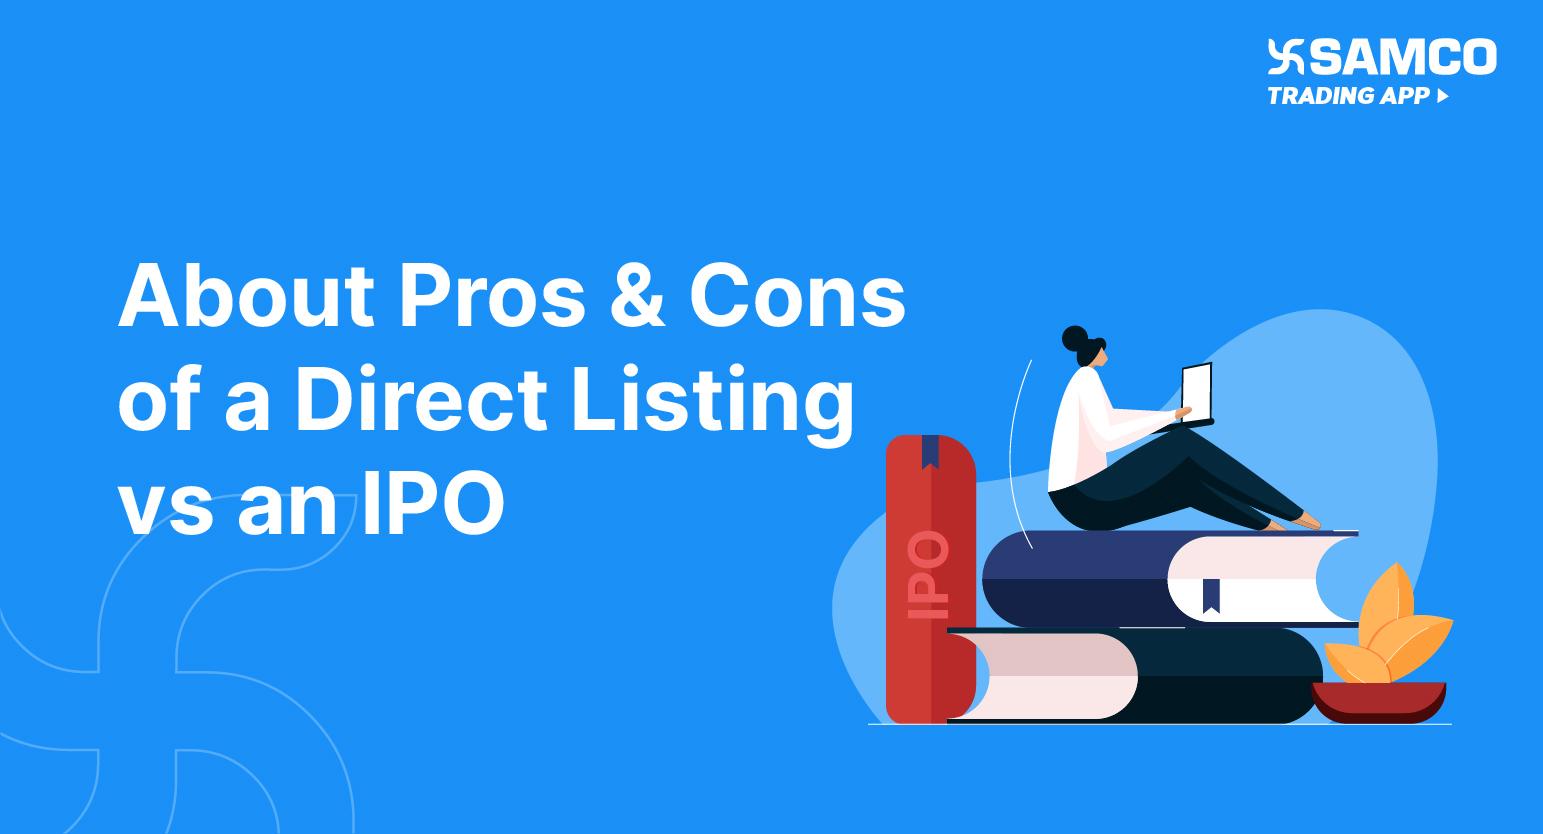 About Pros & Cons of a Direct Listing vs an IPO